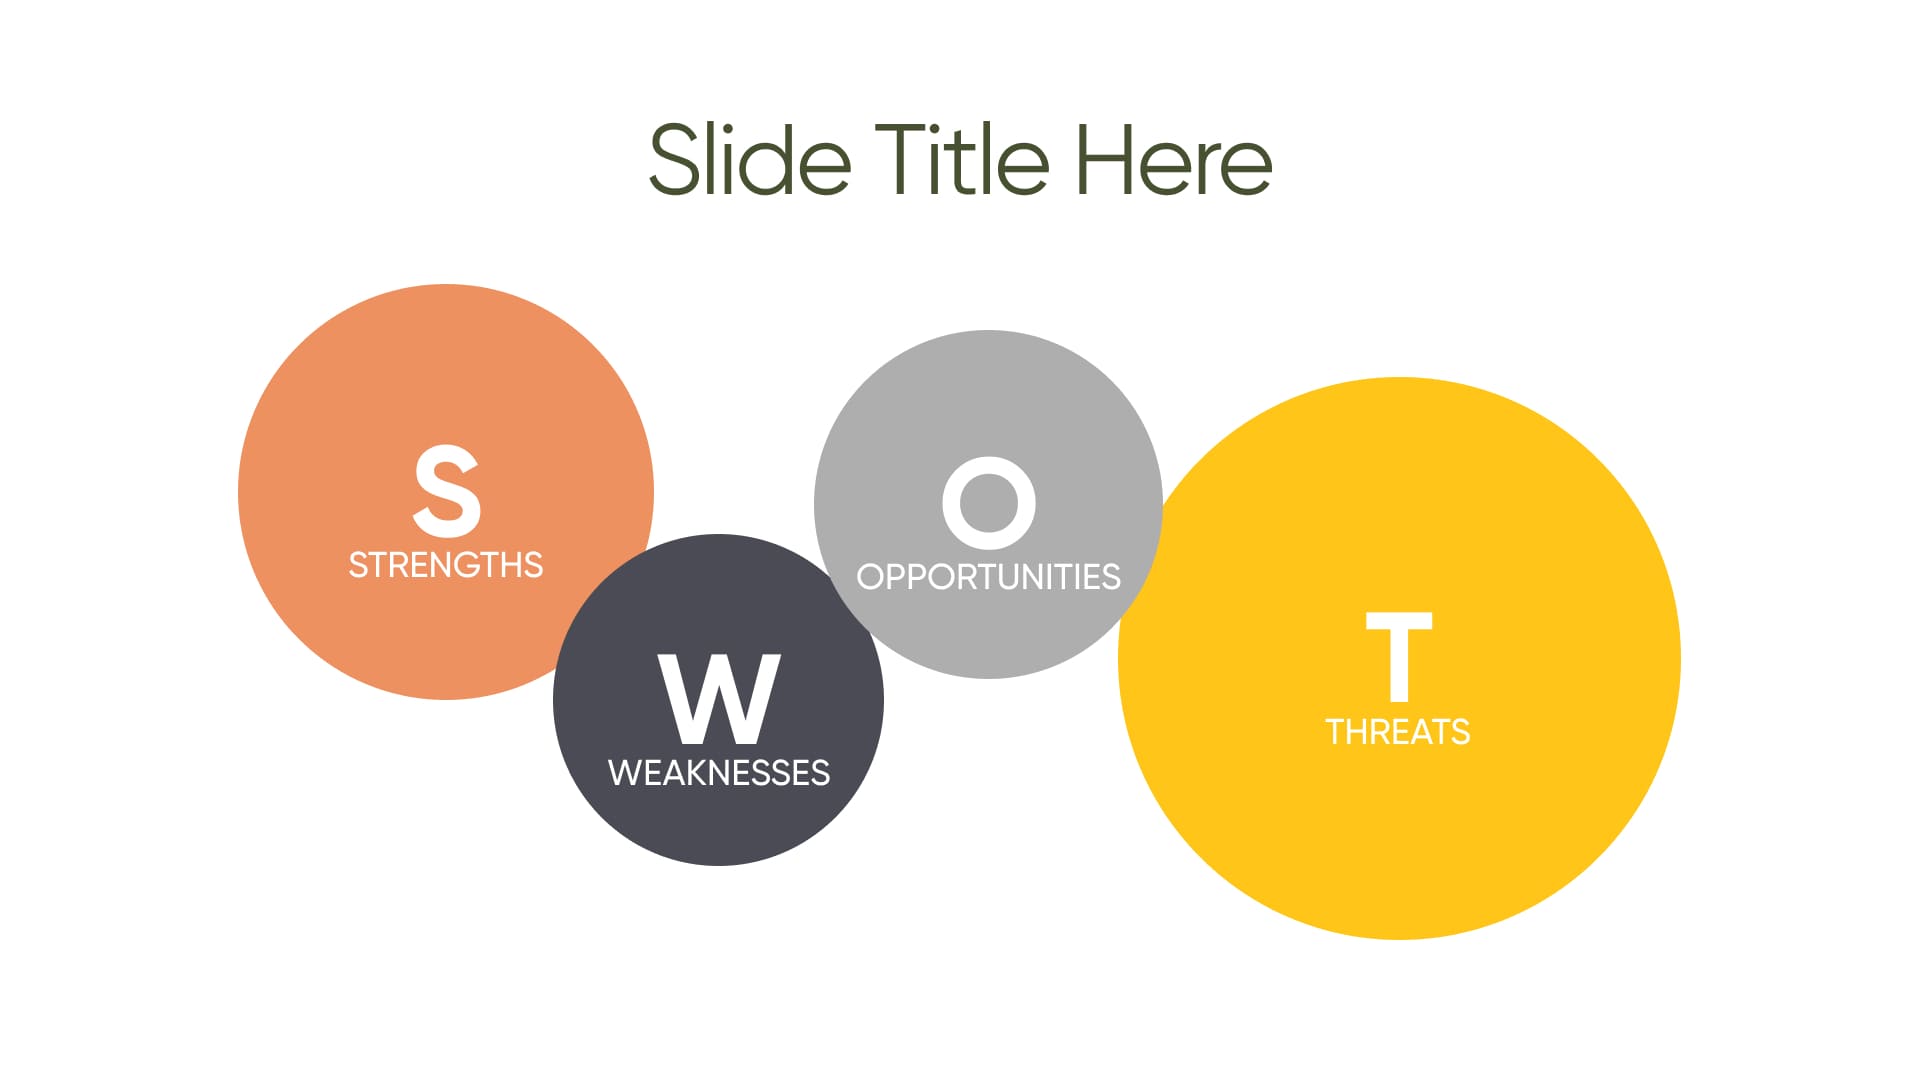 swot template for powerpoint